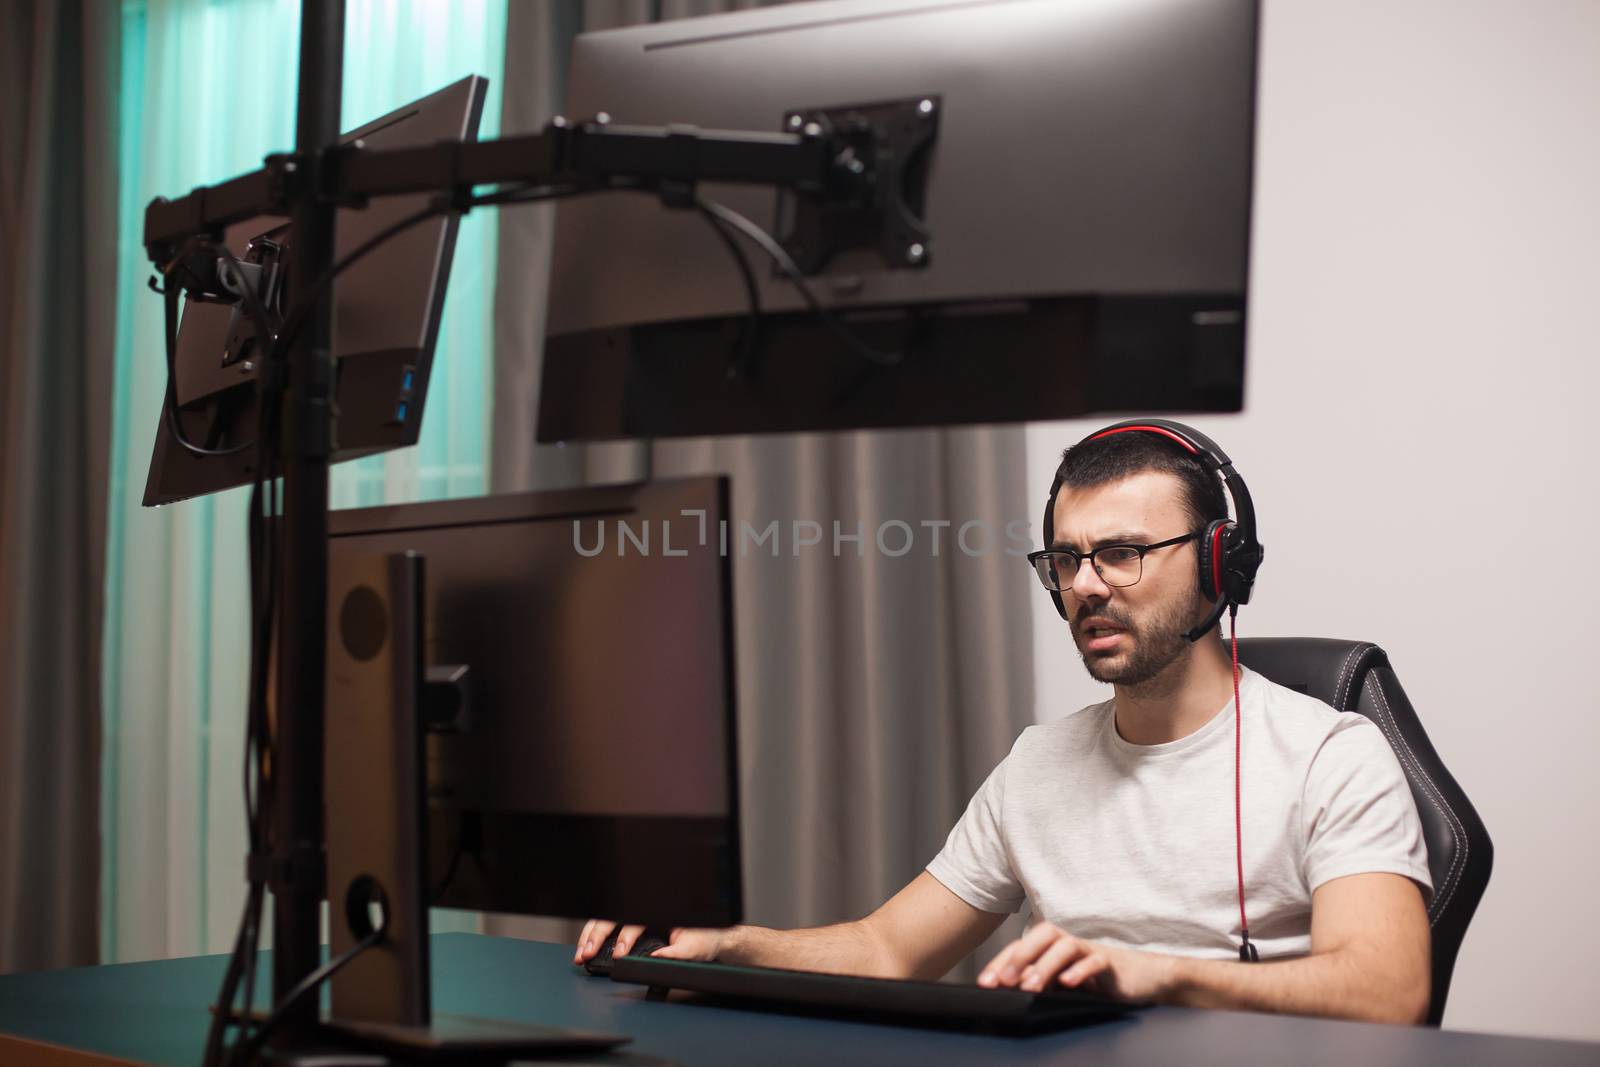 Man talking with others players using headphones with microphone while playing shooter game on stream.